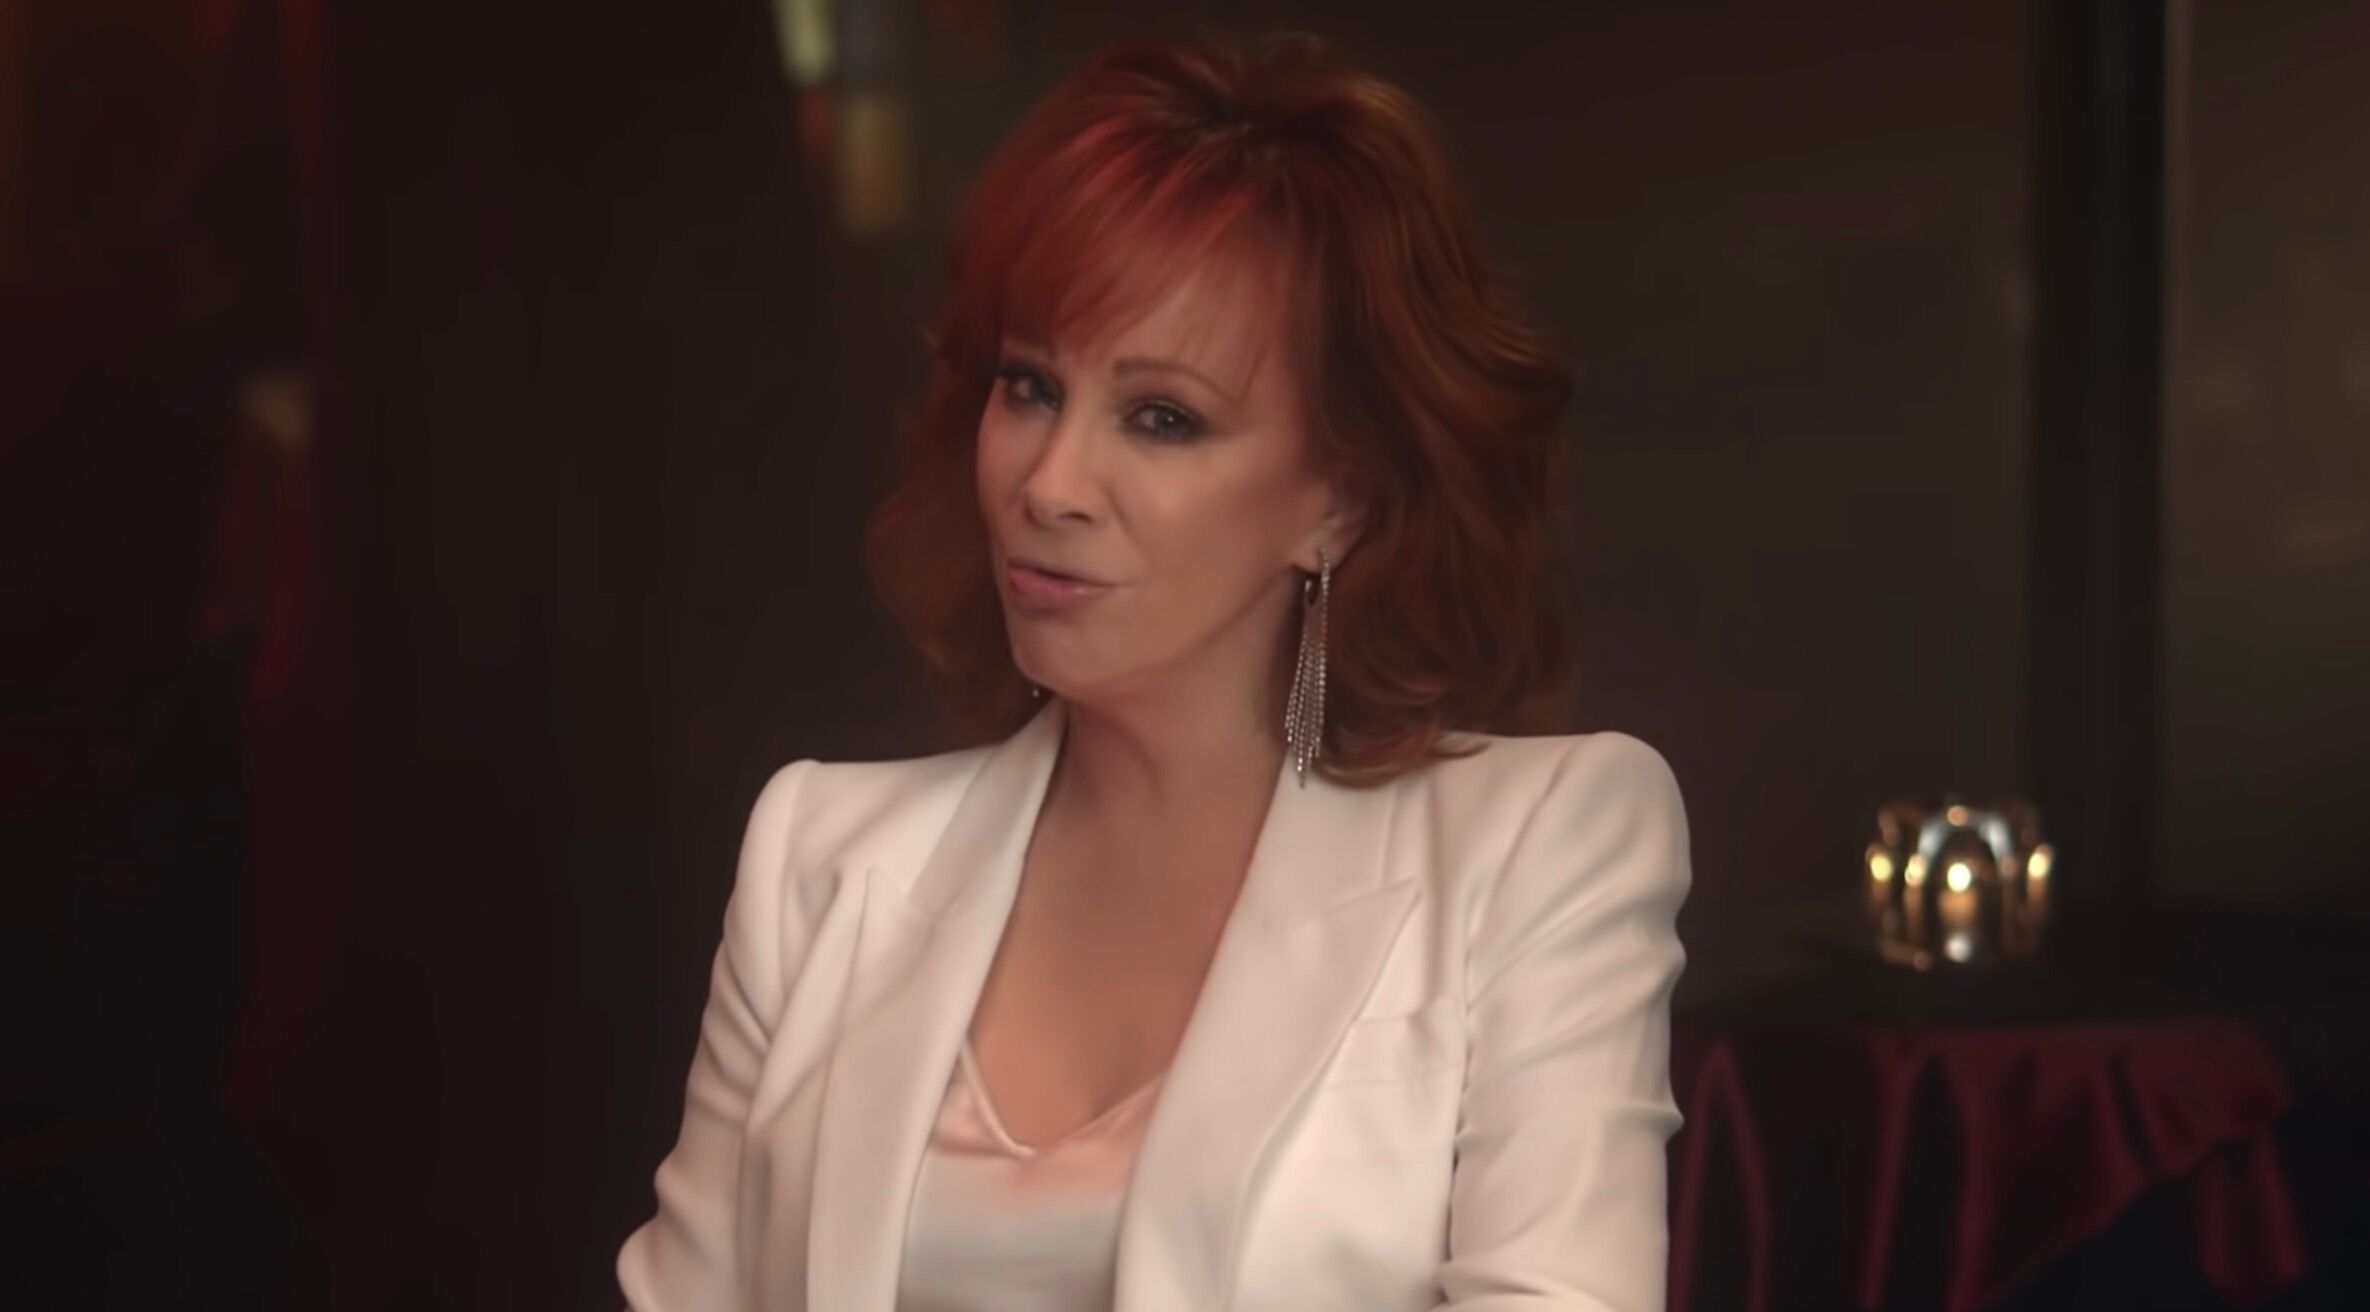 Reba McEntire in a white jacket